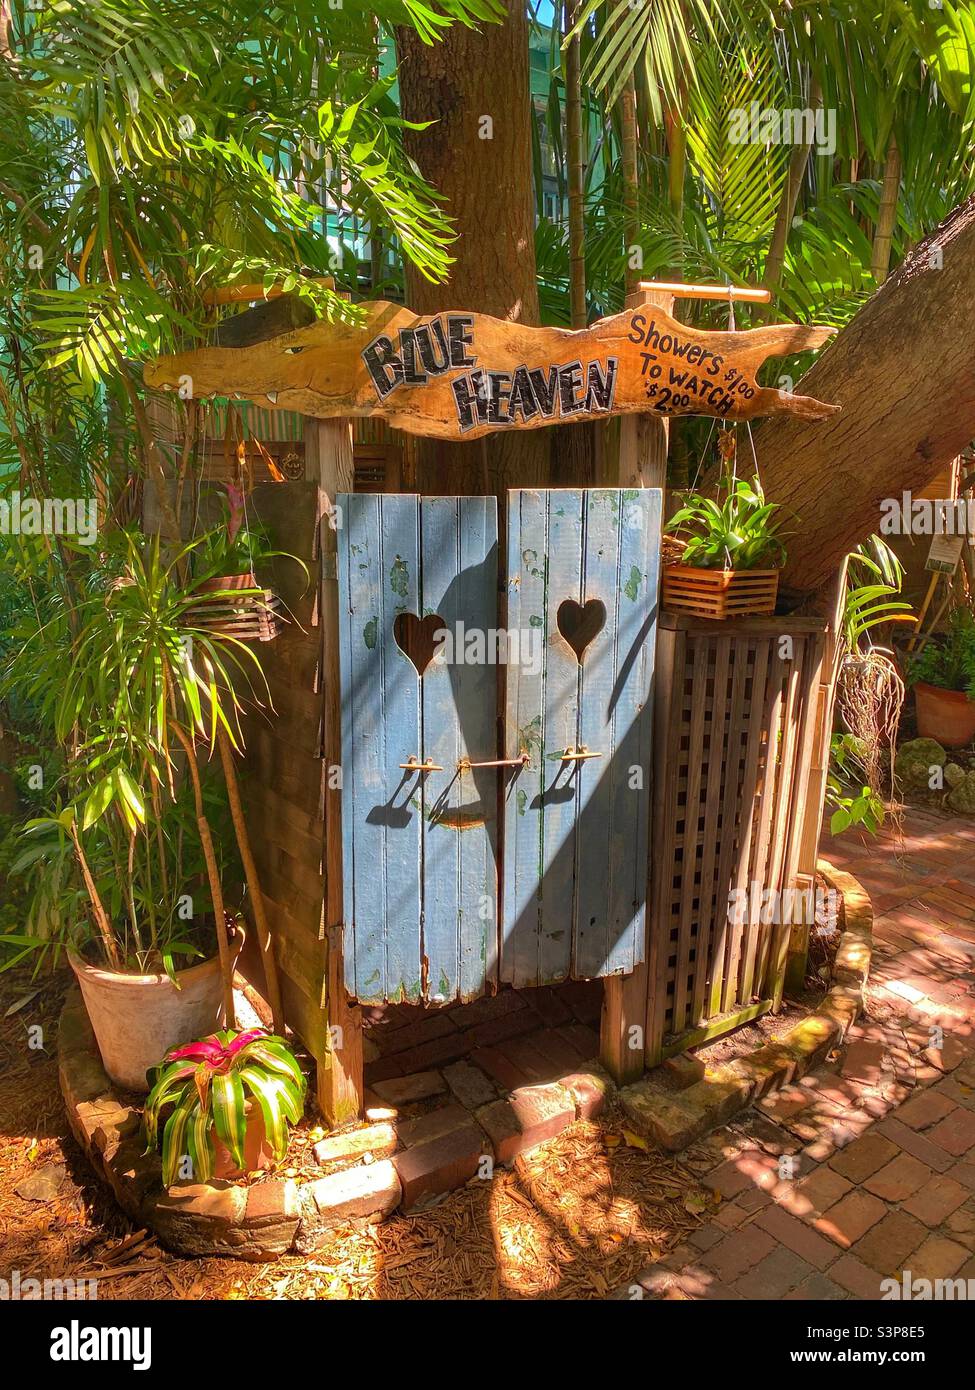 Outhouse shower at a Key West restaurant Stock Photo